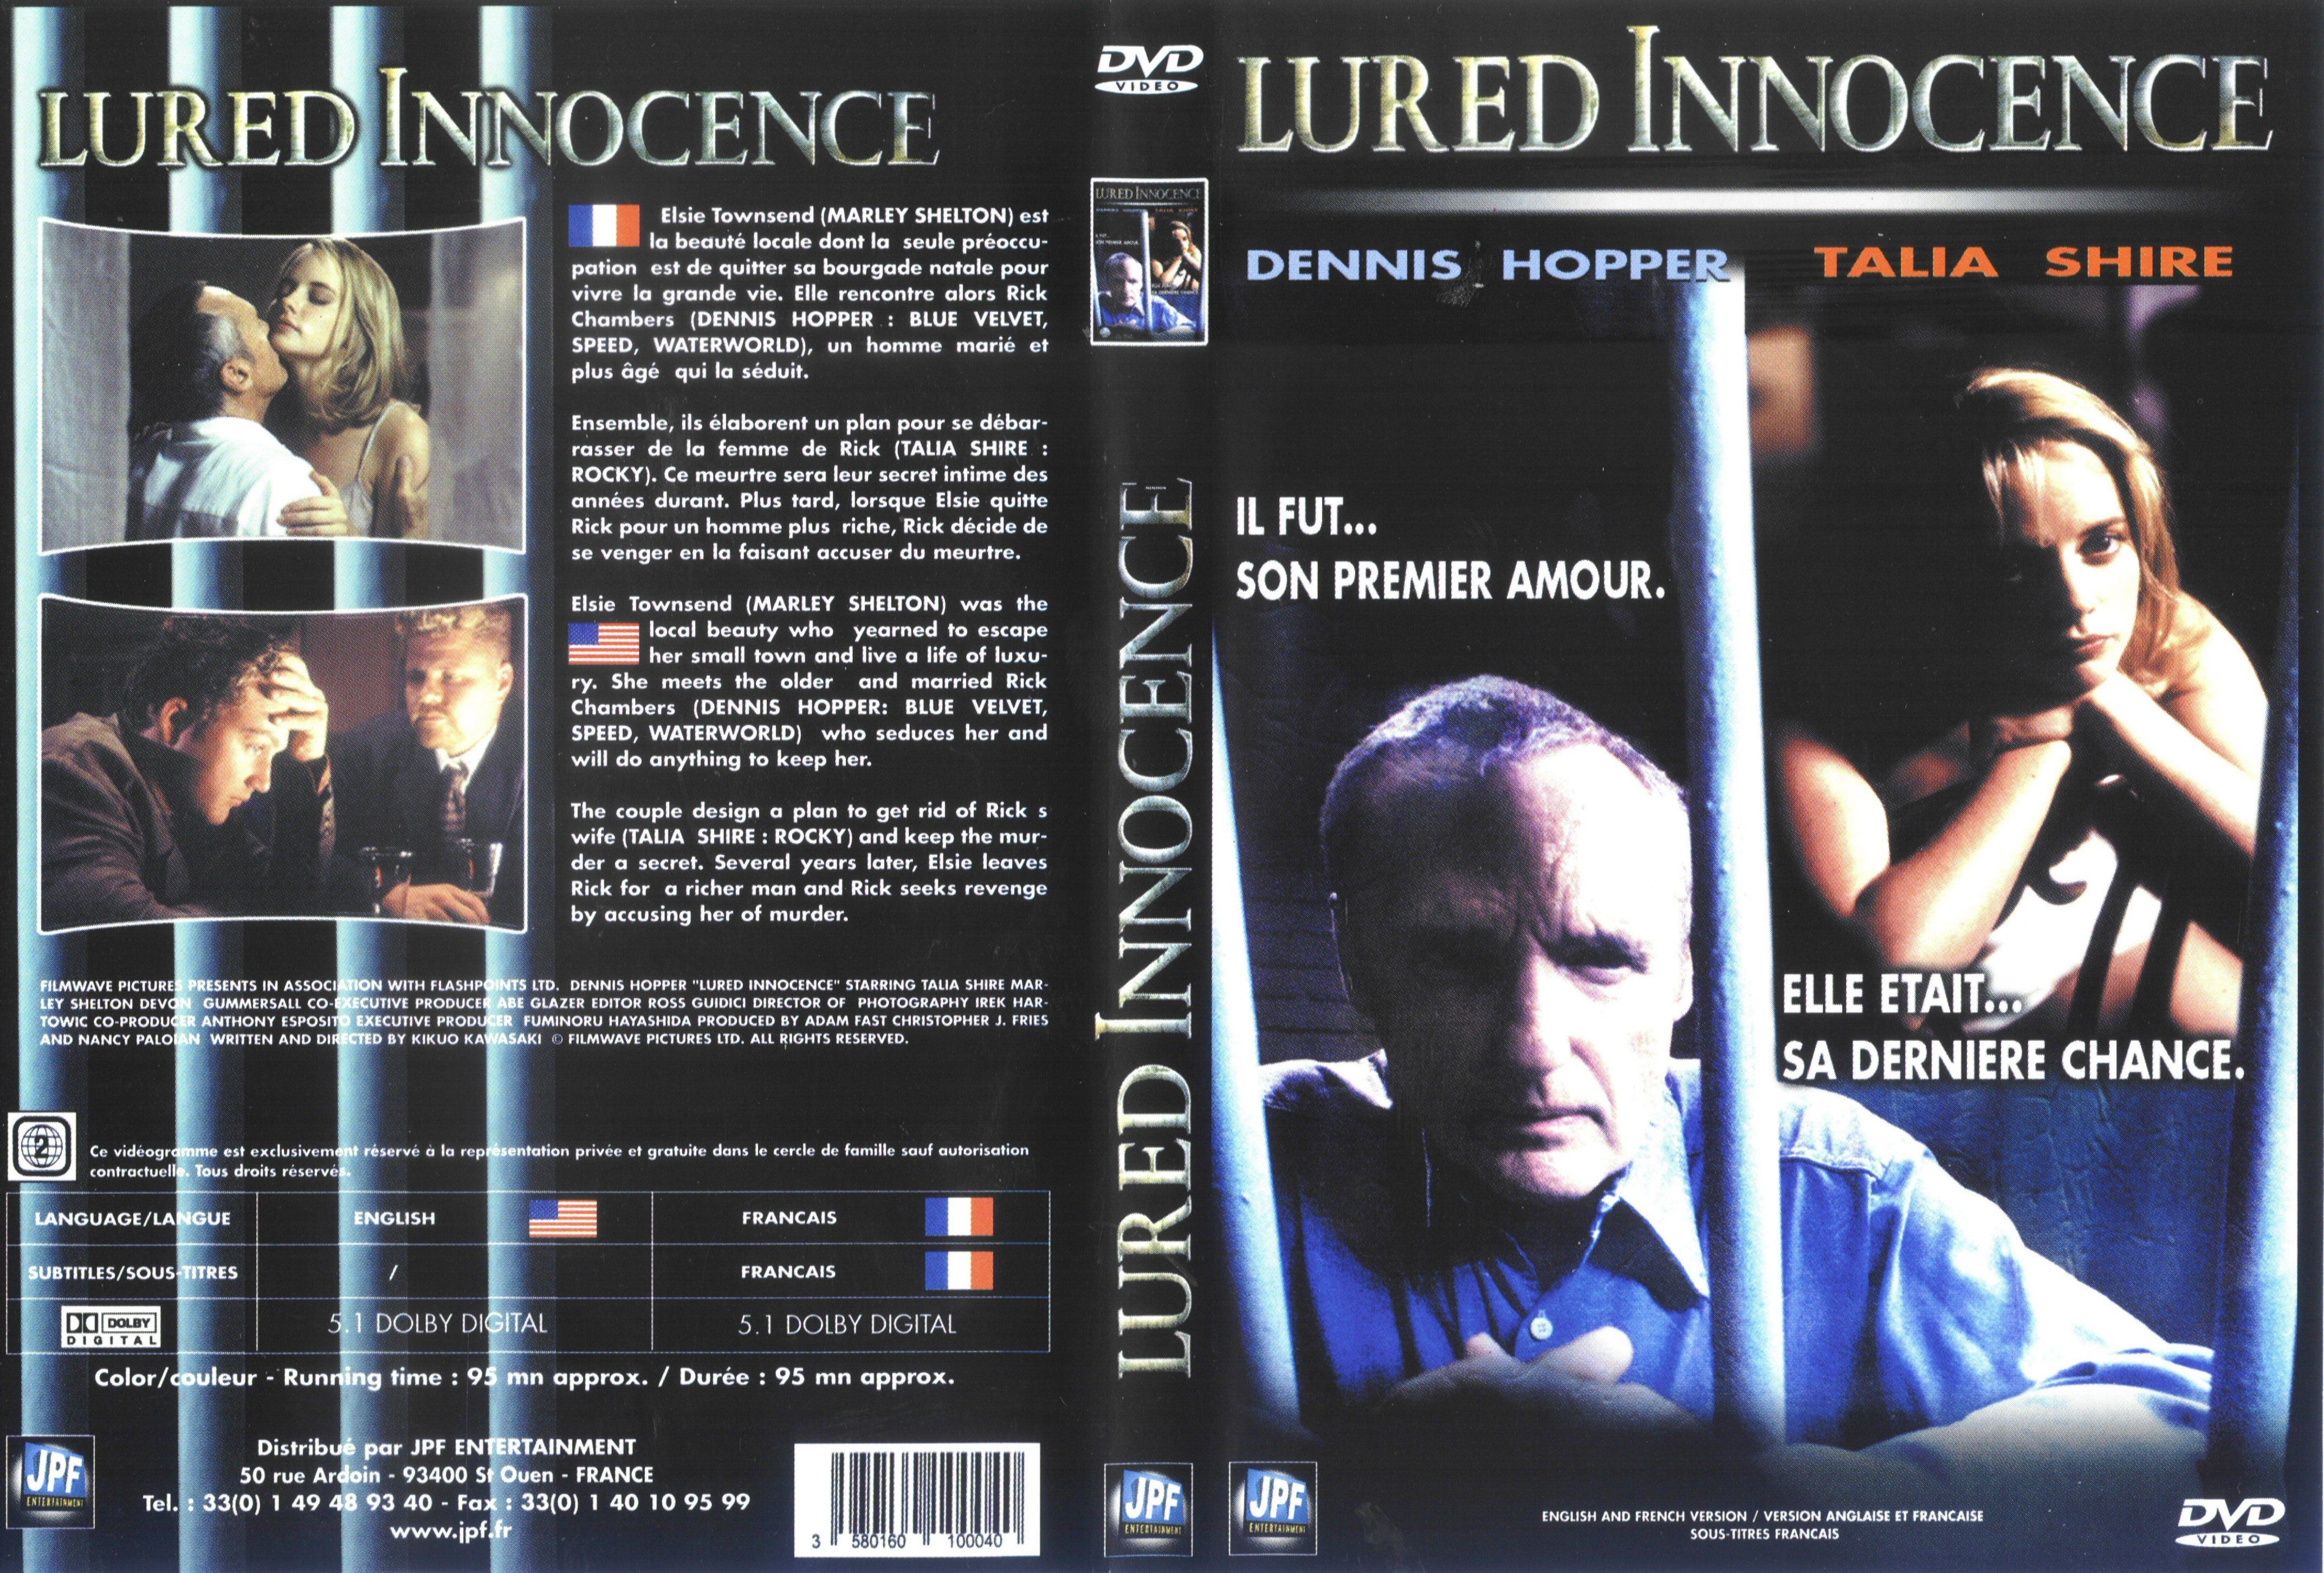 Jaquette DVD Lured innocence